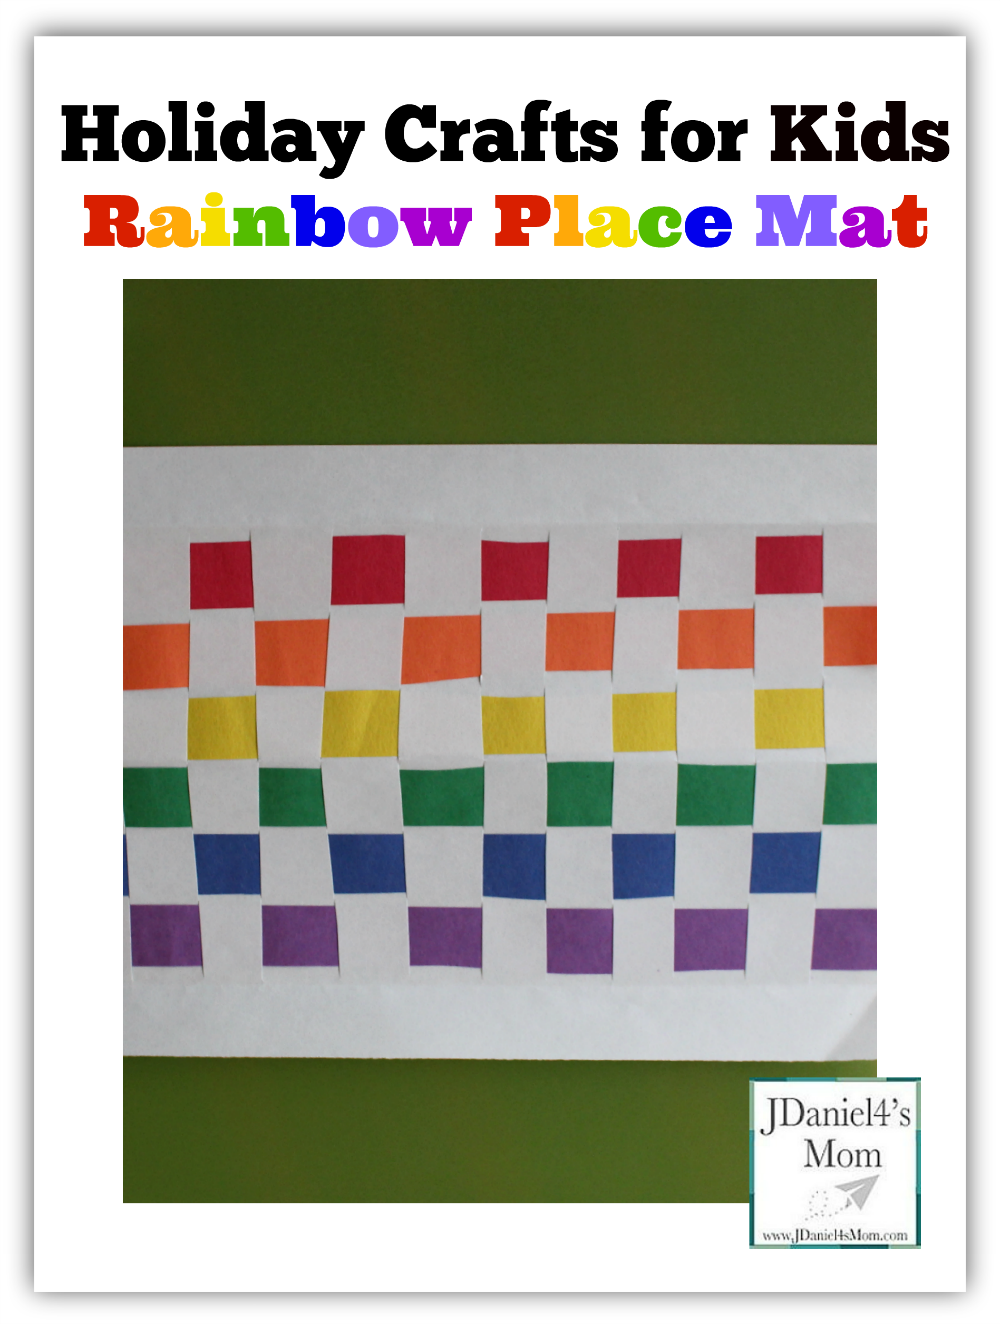 Holiday Crafts for Kids- Rainbow